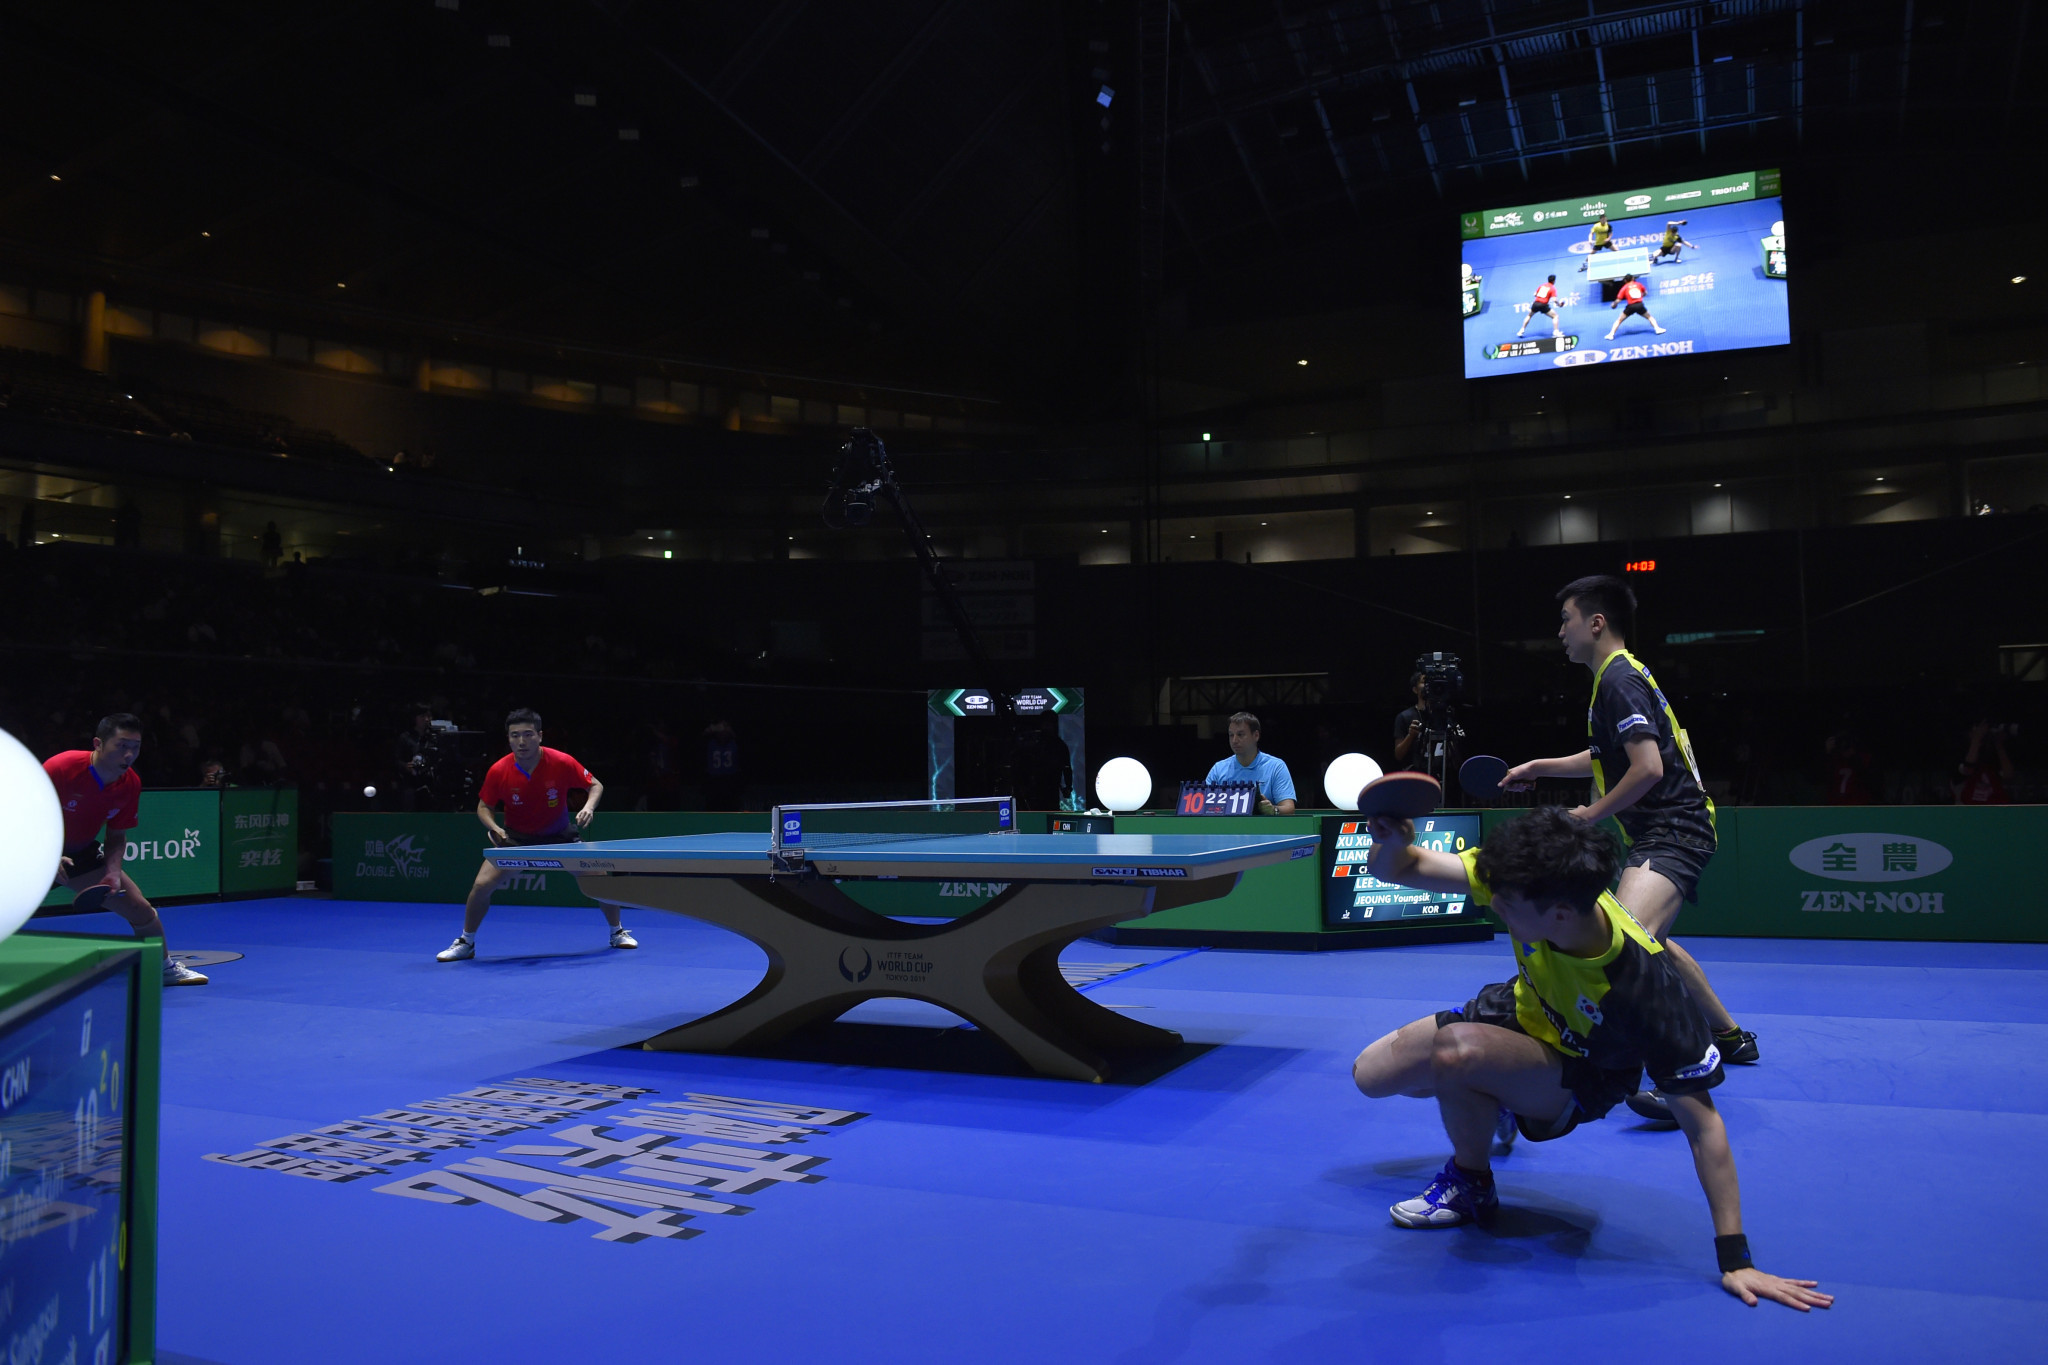 International table tennis is set to resume with events such as the ITTF Men’s World Cup in China this month ©Getty Images